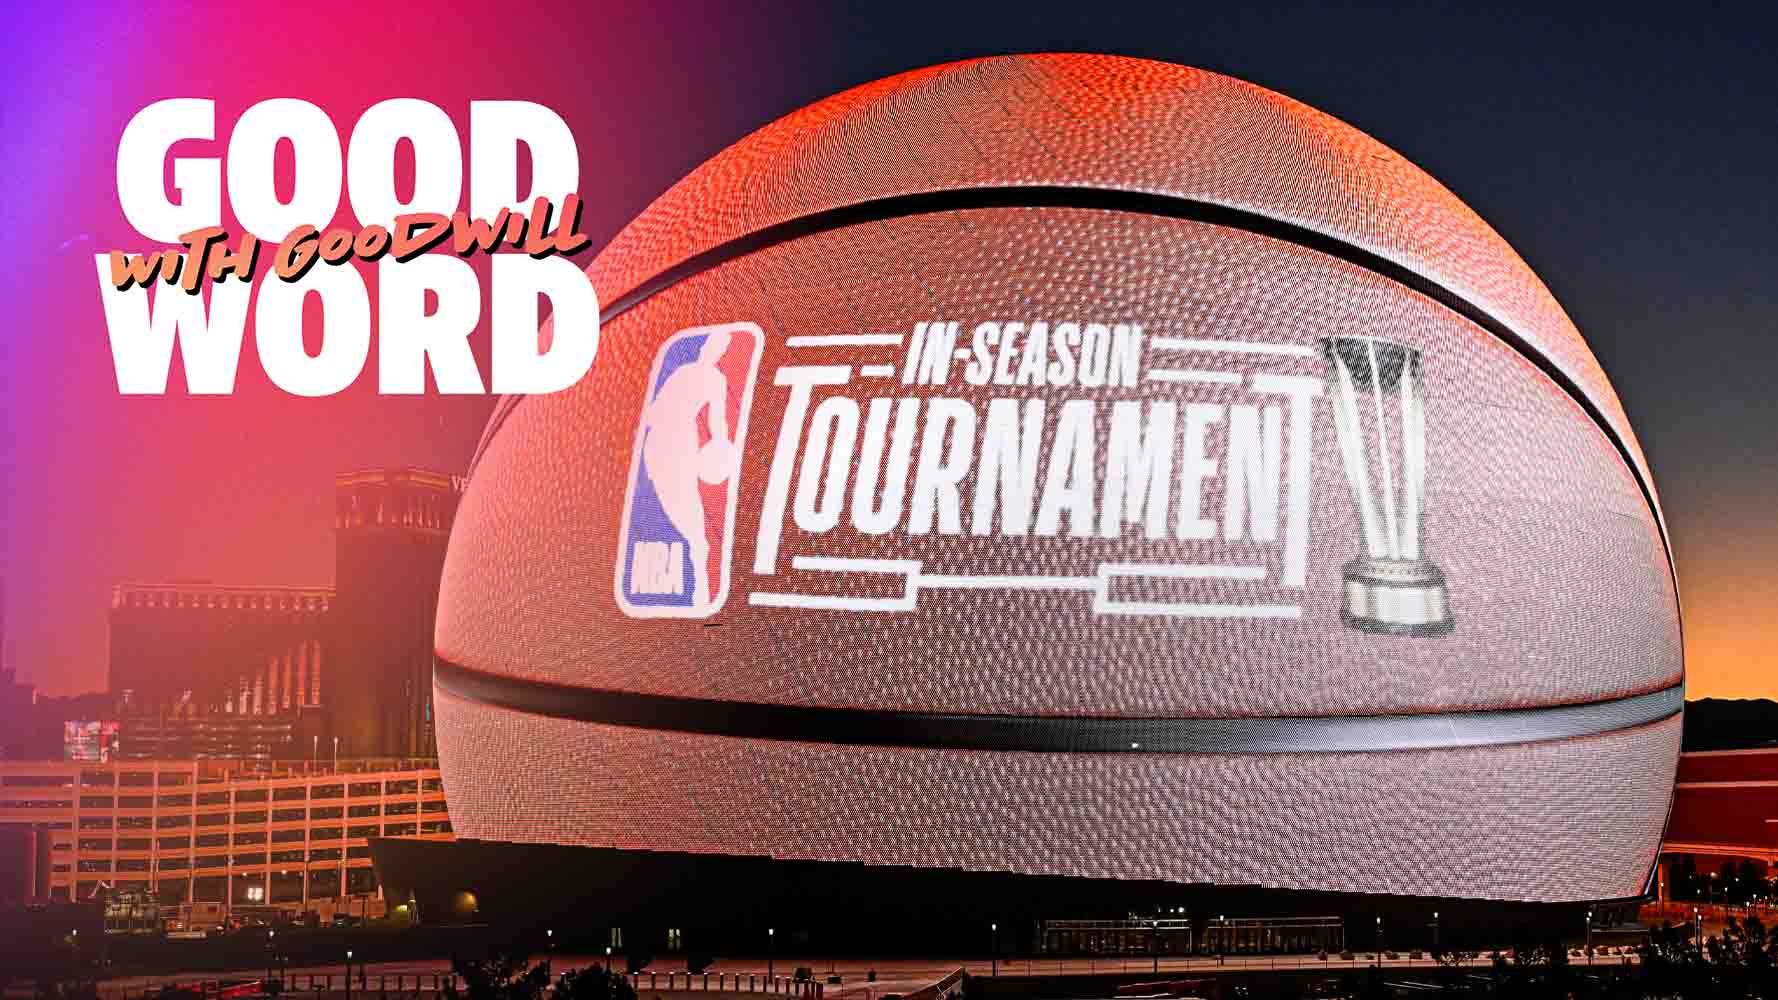 Has the NBA In-Season Tournament revitalized the start of the regular season? | Good Word with Goodwill